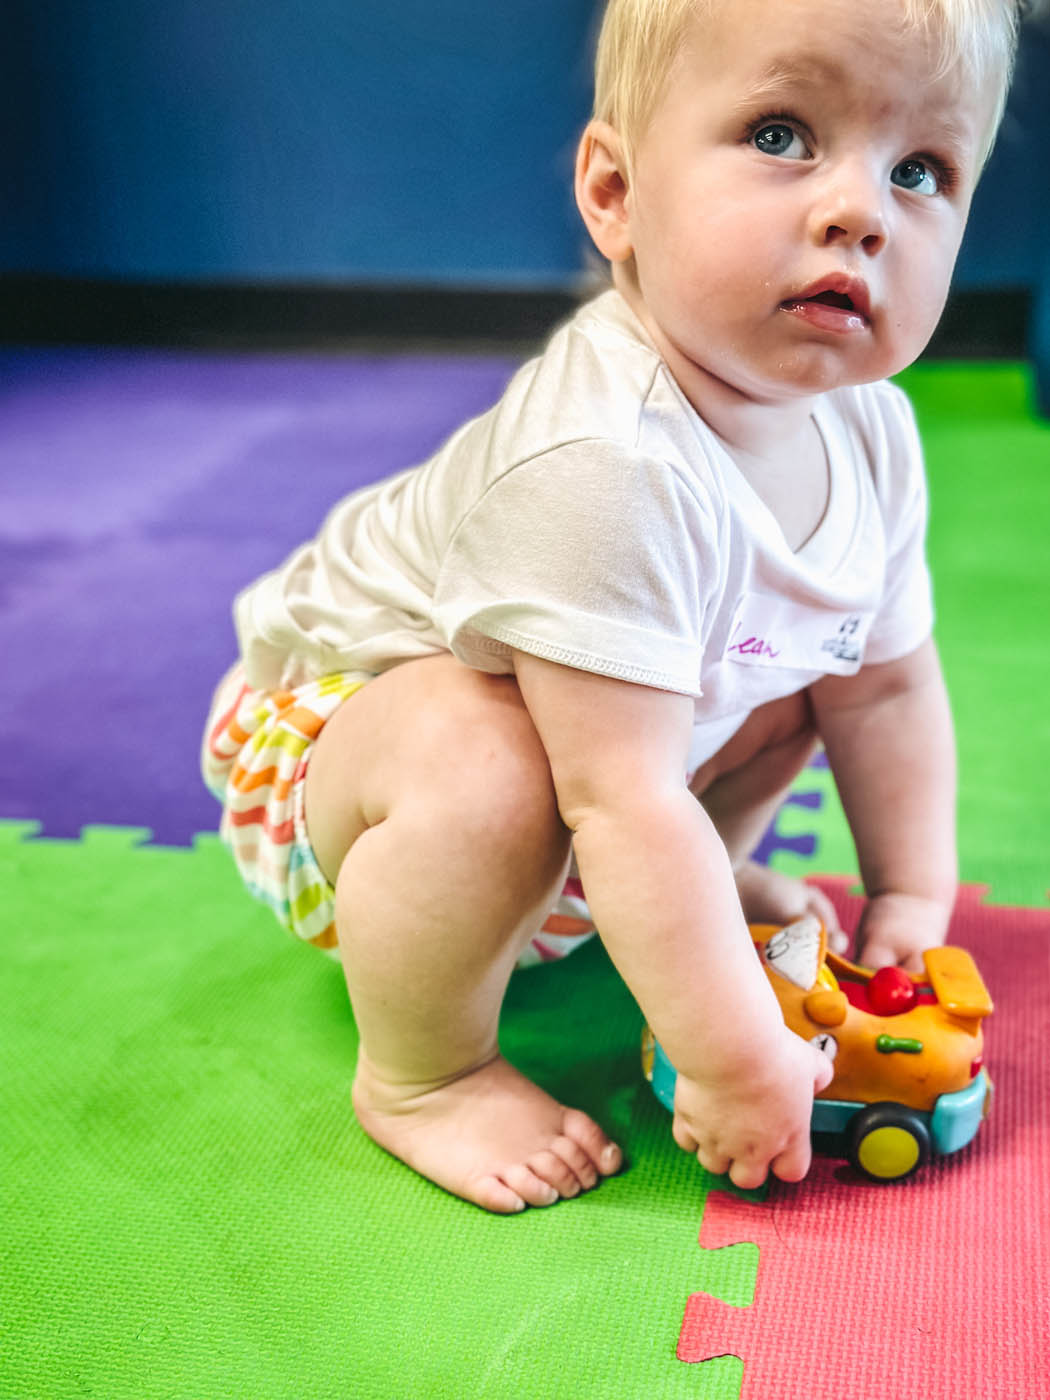 A baby boy playing at Romp n' Roll Midlothian kids gym, sign up for our baby classes in Midlothian, VA today.